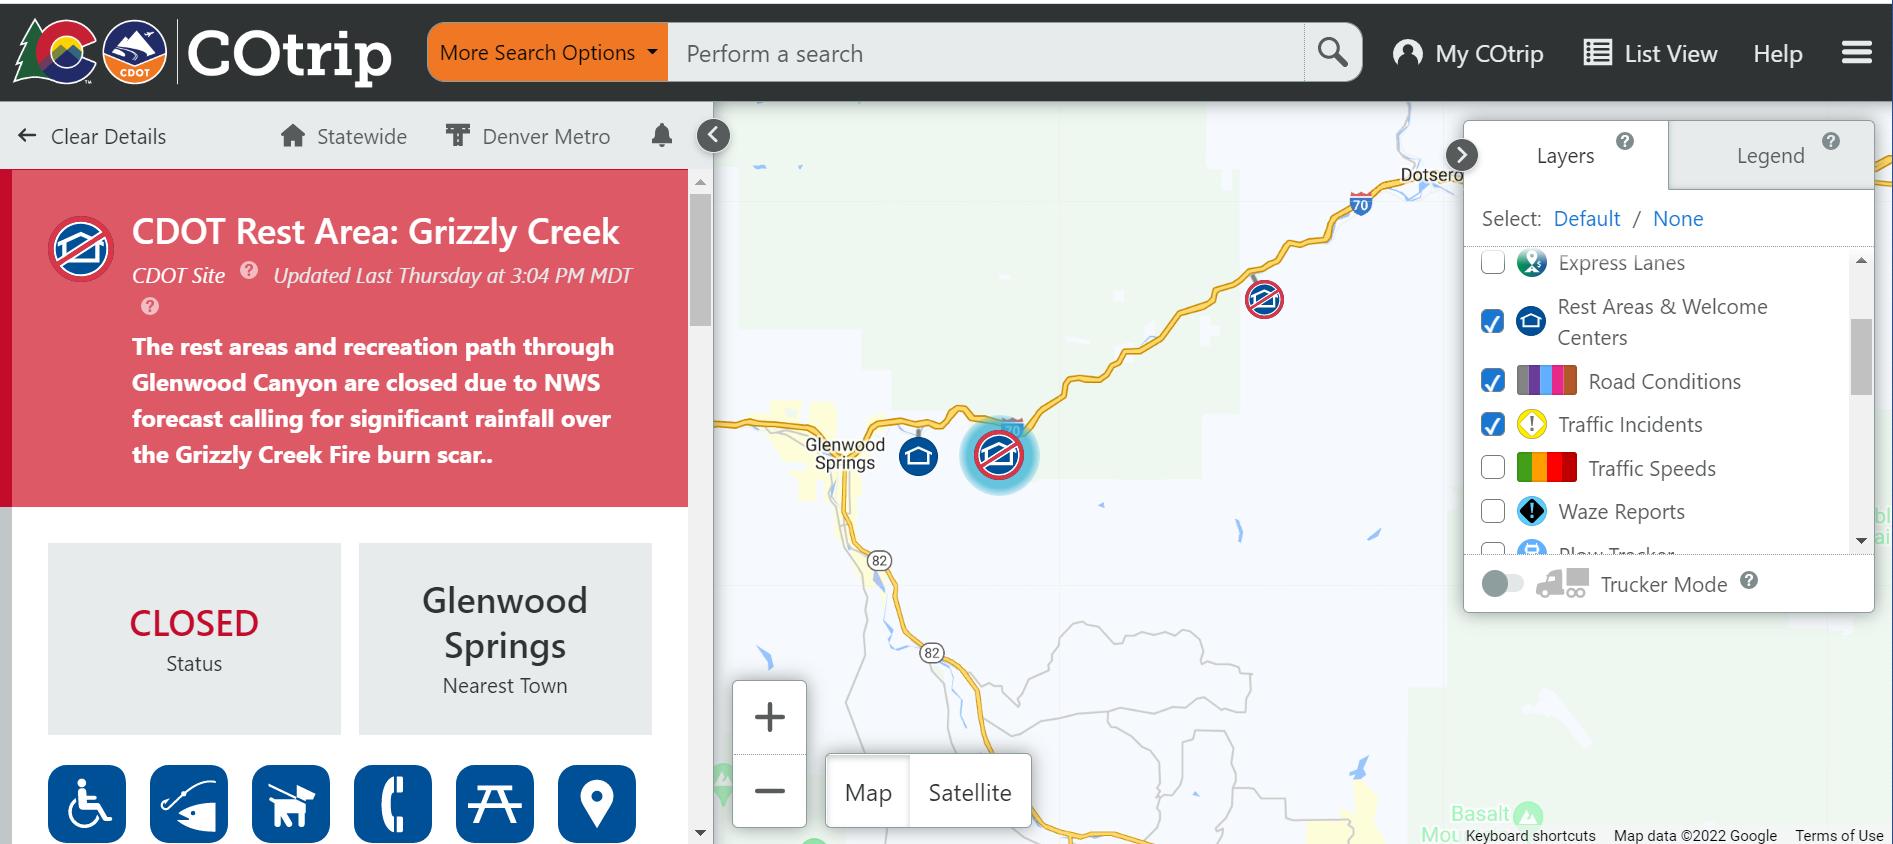 CDOT Rest Area: Grizzly Creek Closed on COtrip map detail image